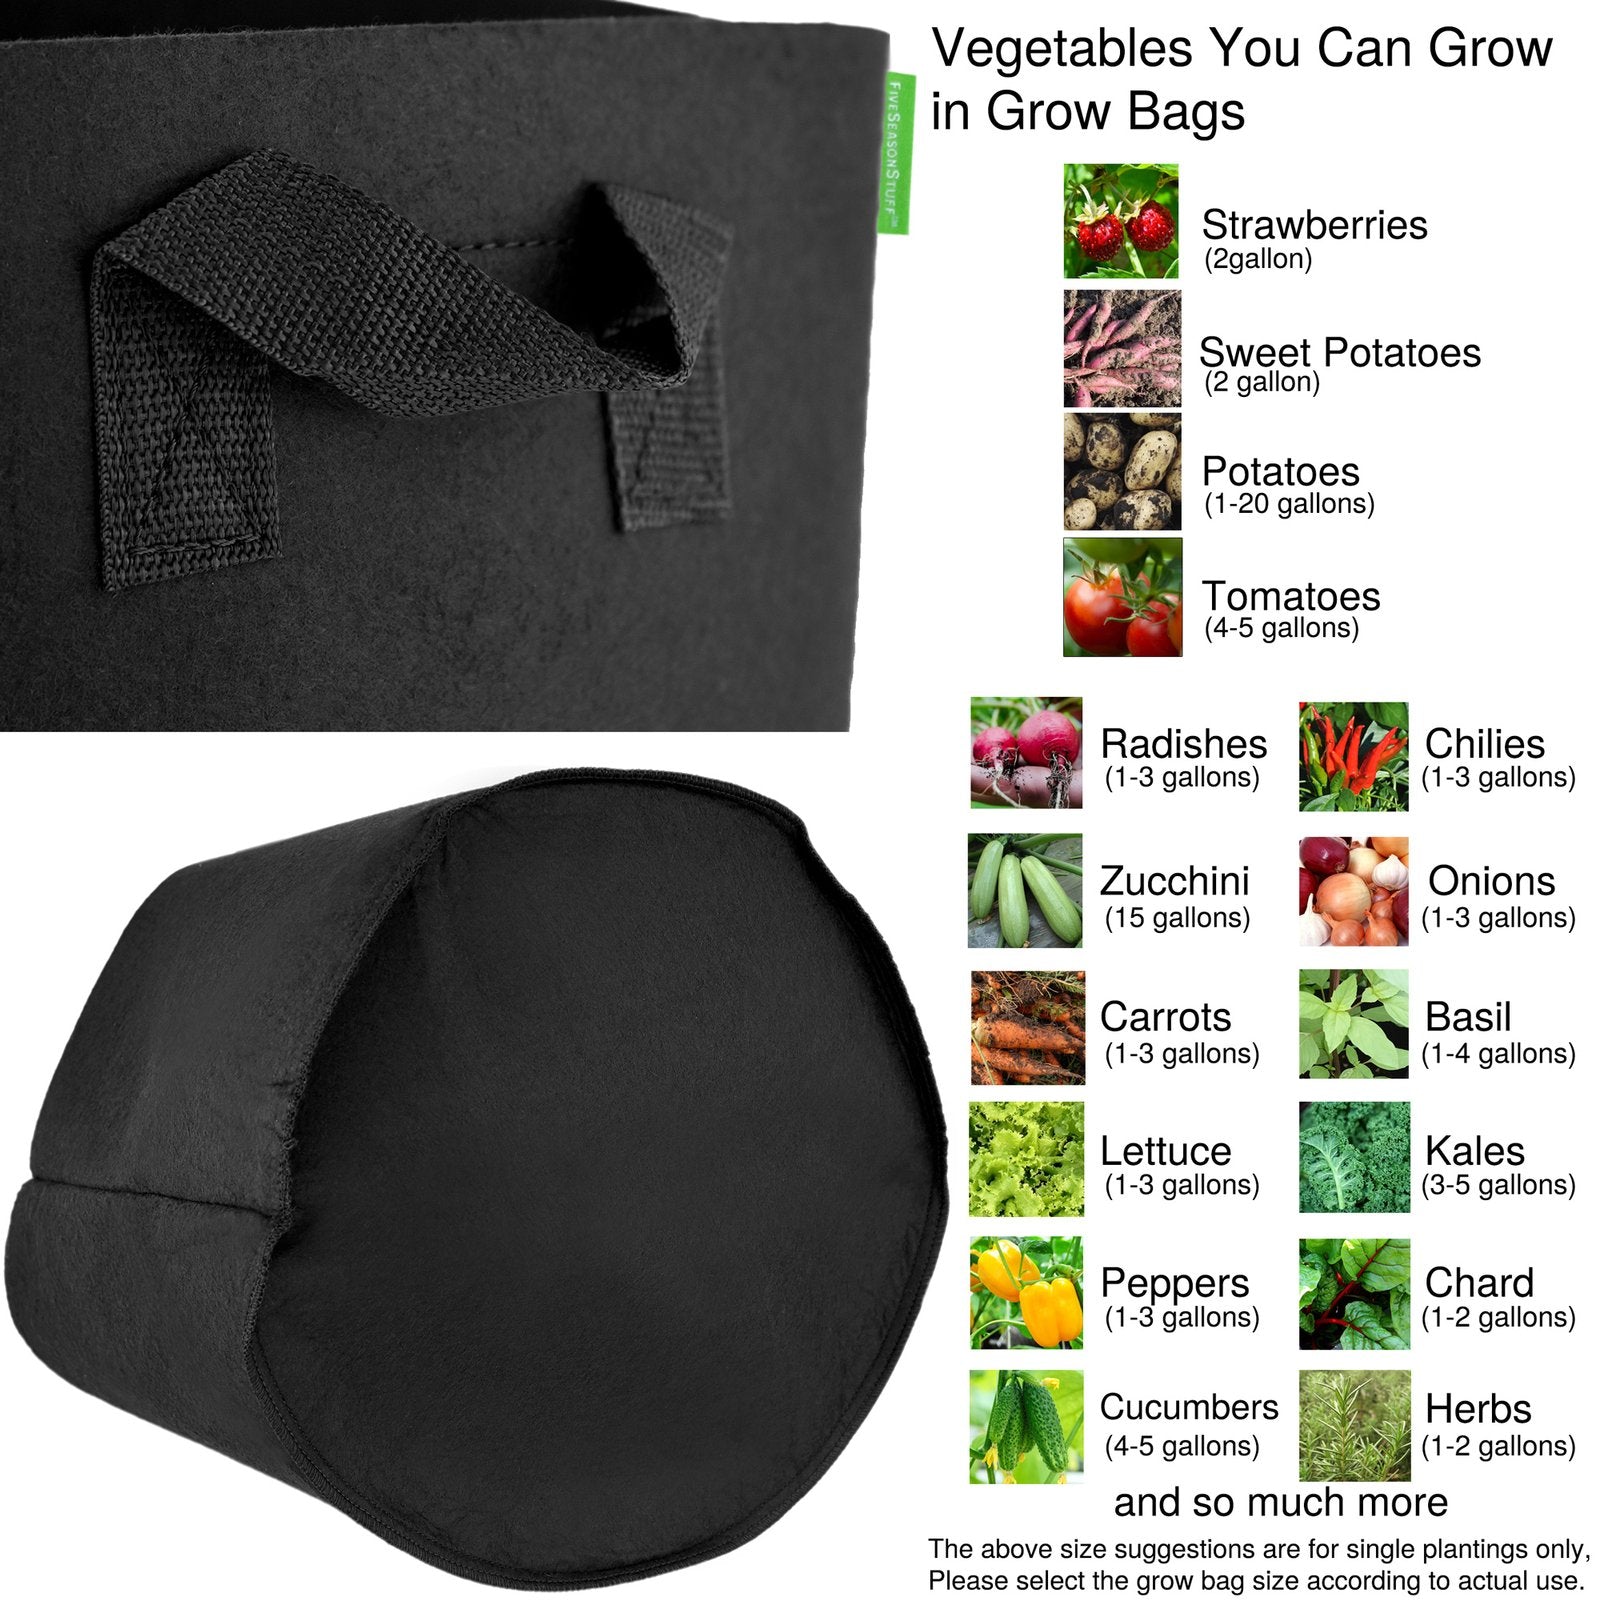 8 Pack 5 Gallons Grow Bags - Breathable Fabric Pots for Healthier Plants Vegetables Flowers – Heavy Duty Thick Containers with Sturdy Handles - Aeration Planters for Smart Gardening (Black)